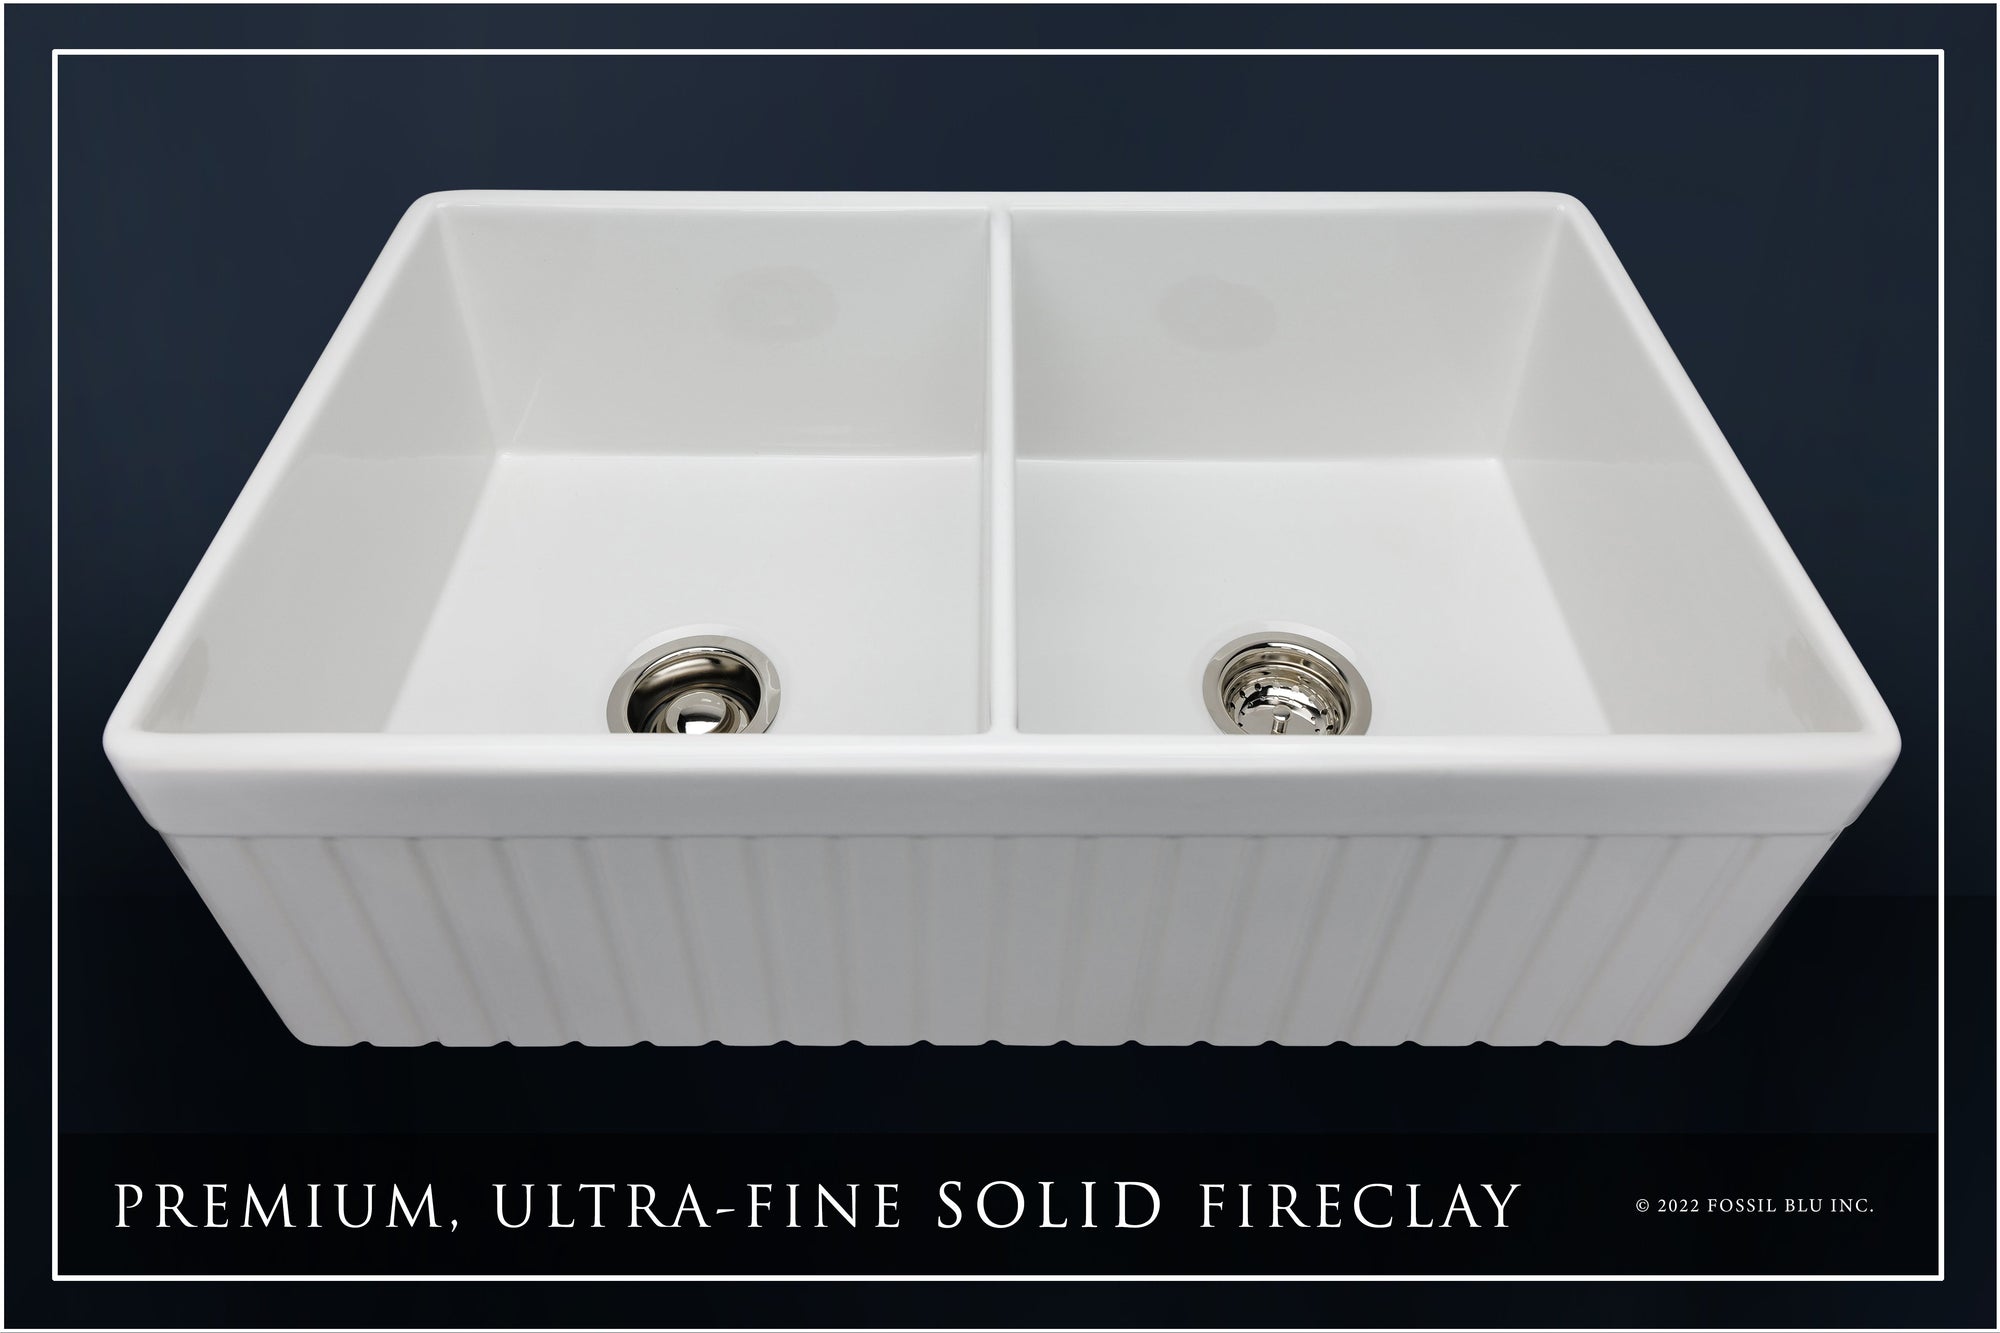 FSW1006PN LUXURY 33-INCH SOLID FIRECLAY FARMHOUSE SINK IN WHITE, POLISHED NICKEL ACCS, FLUTED FRONT